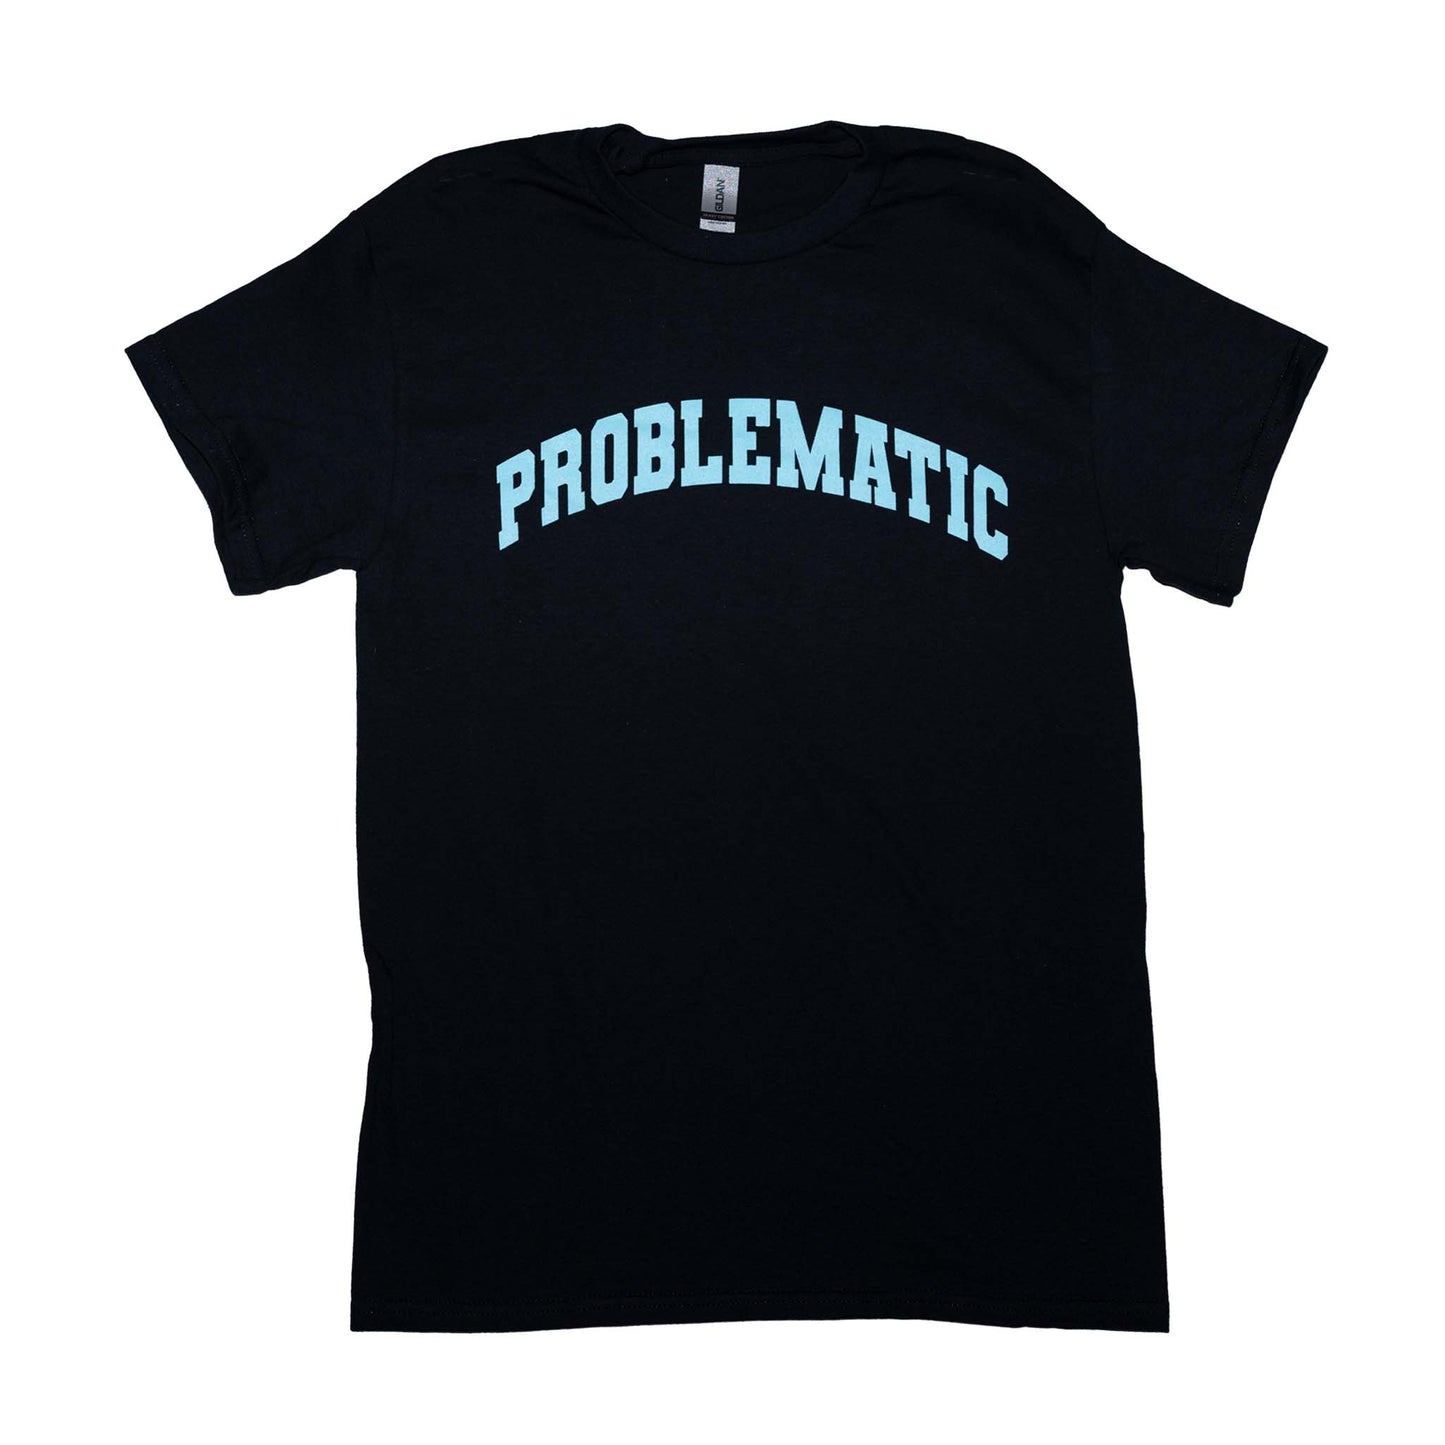 "Problematic" Shirt